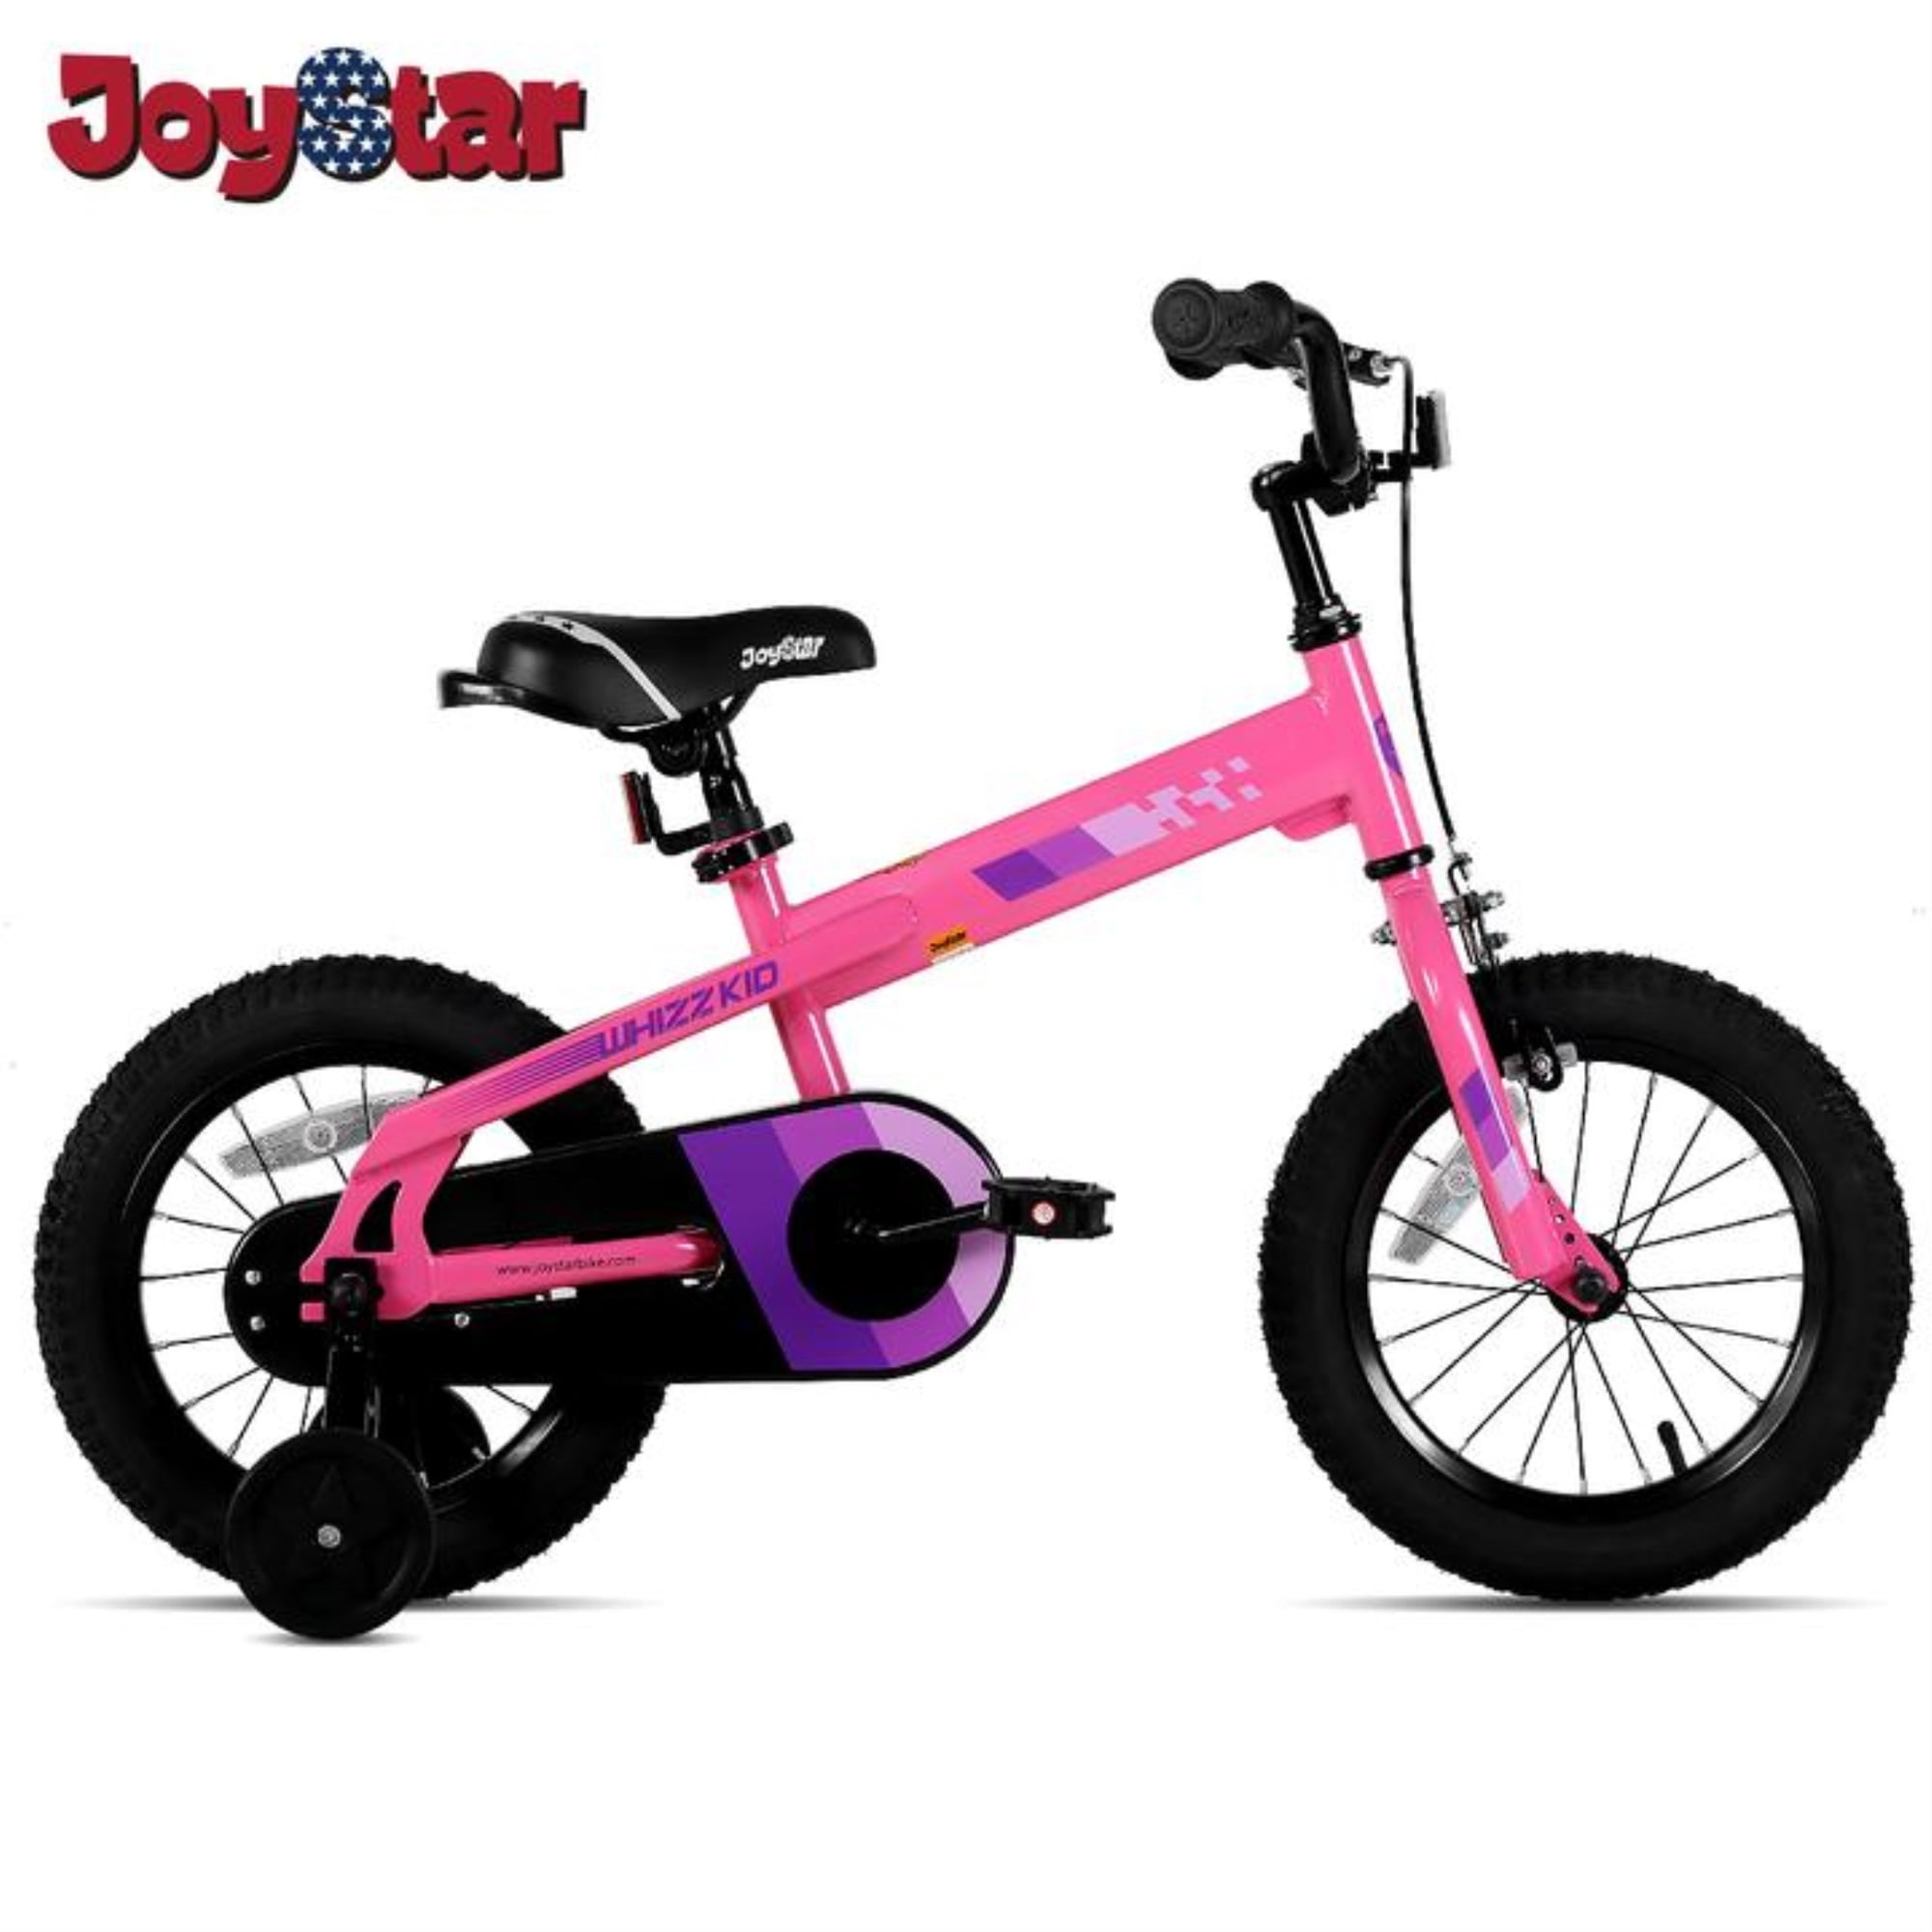 Blue and Pink 14 16 Inch Foldable Bike with Flash Training Wheels and Dual Handbrakes Outroad Folding Kids Bike for 3-8 Years Old Boys Girls Child Bicycle 